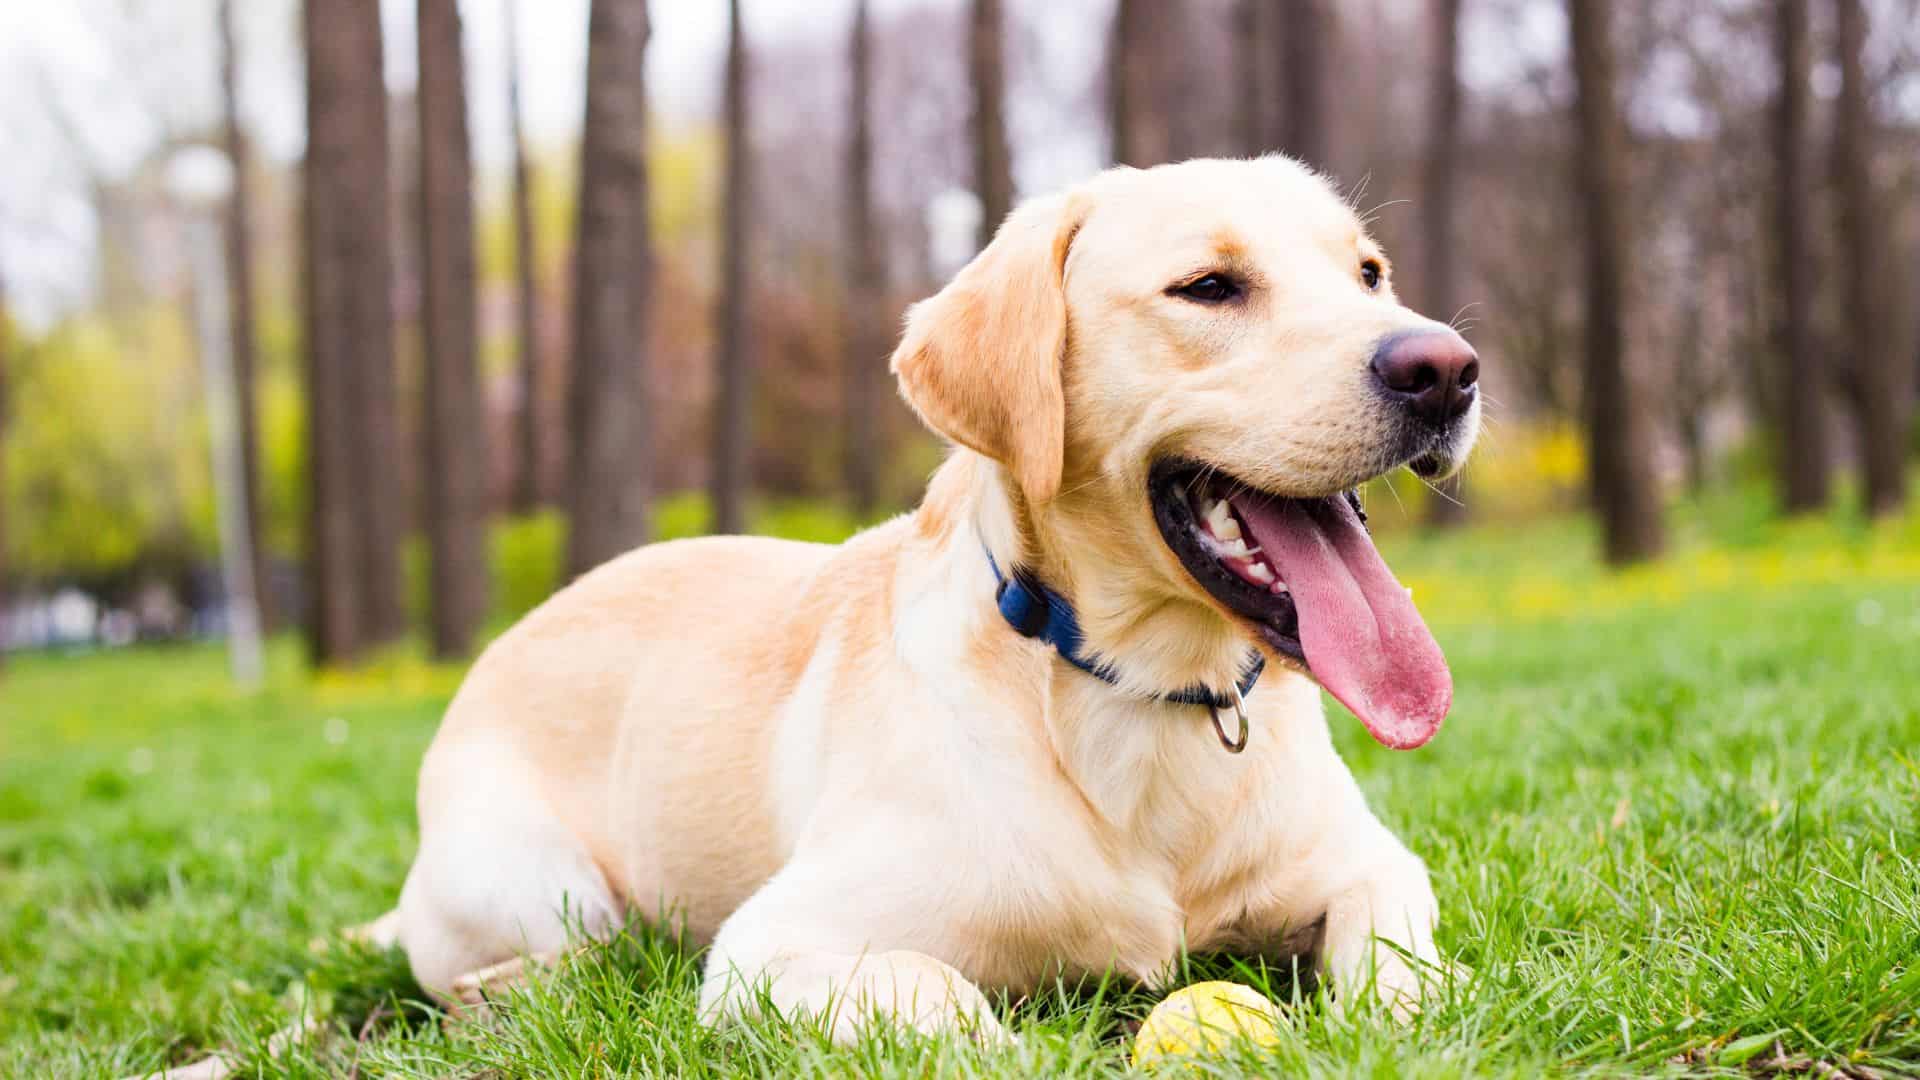 Decoding The Length Of A Dog’s Memory